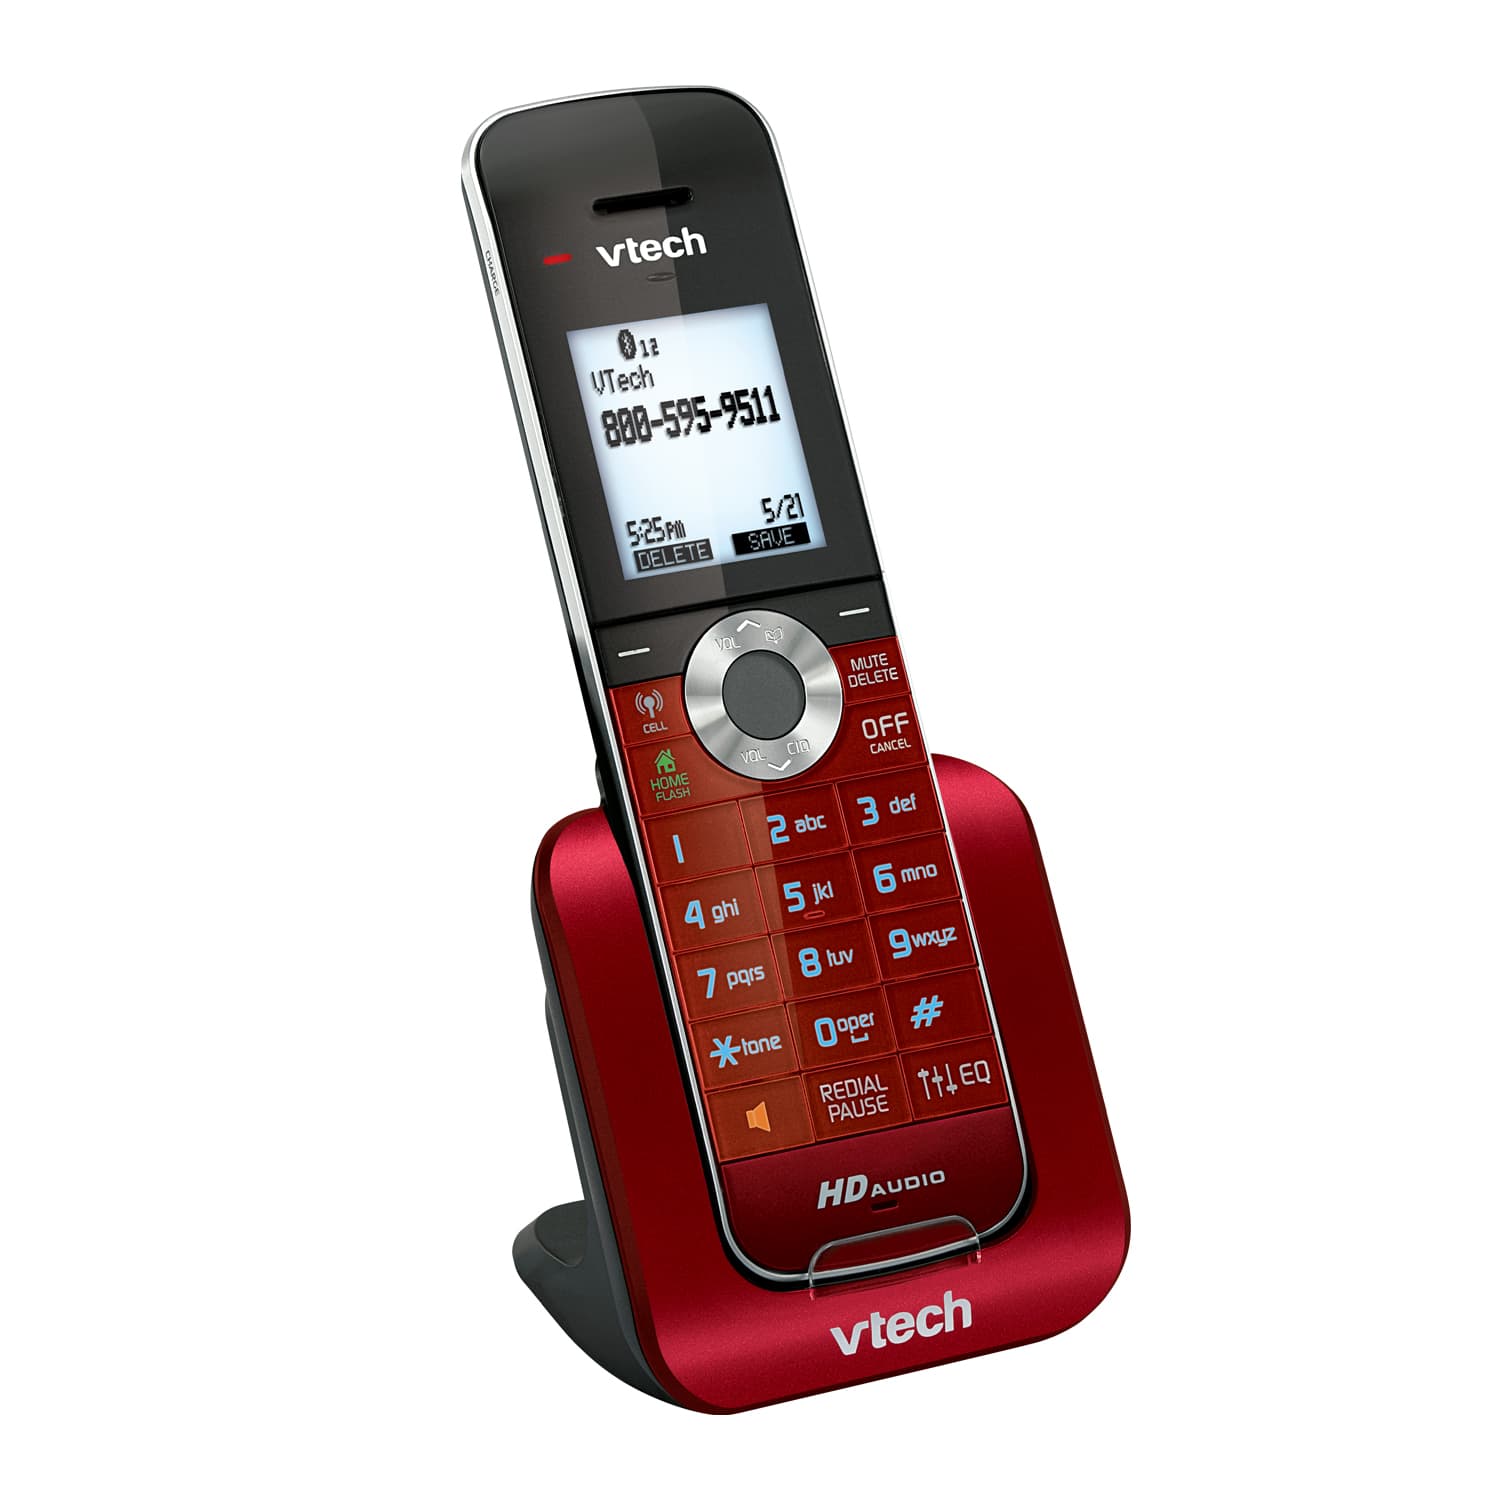 5 Handset Connect to Cell™ Answering System with Caller ID/Call Waiting - view 6